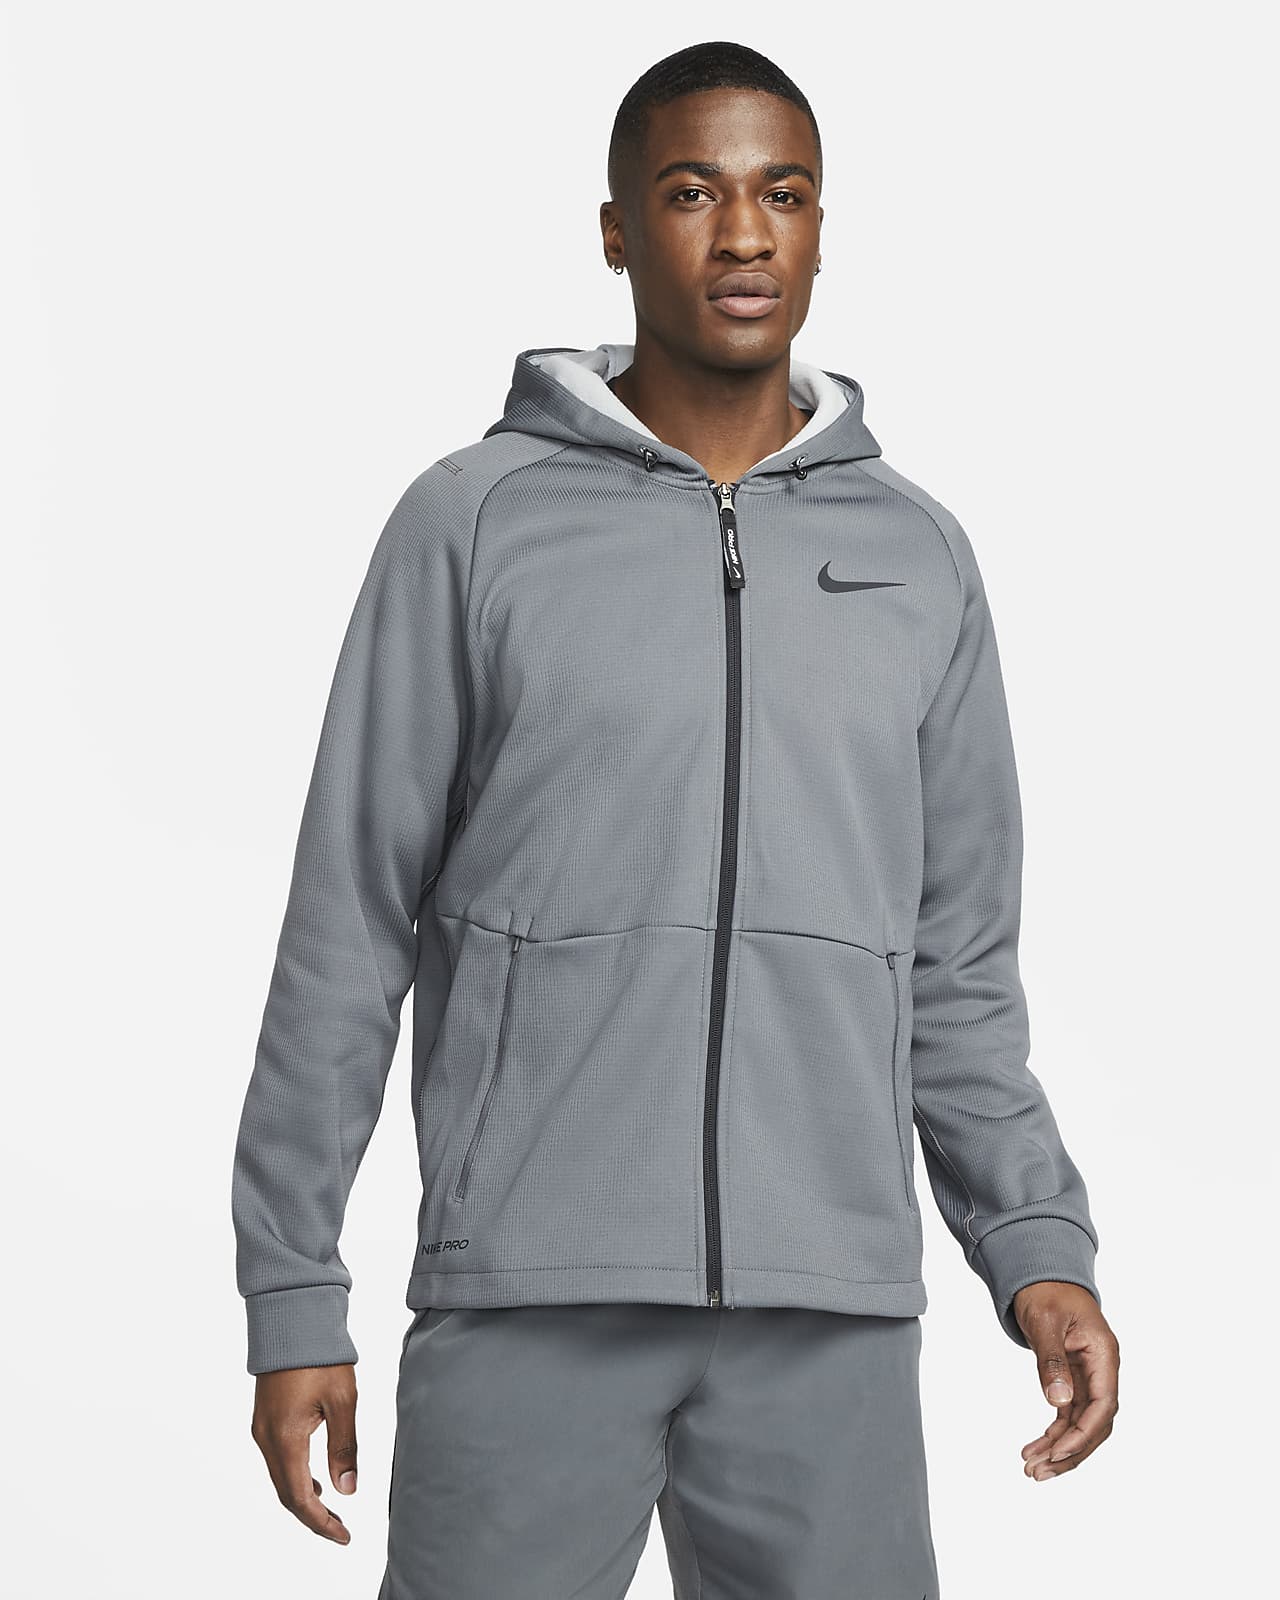 Susurro Dificil reinado Nike Therma Sphere Men's Therma-FIT Hooded Fitness Jacket. Nike.com